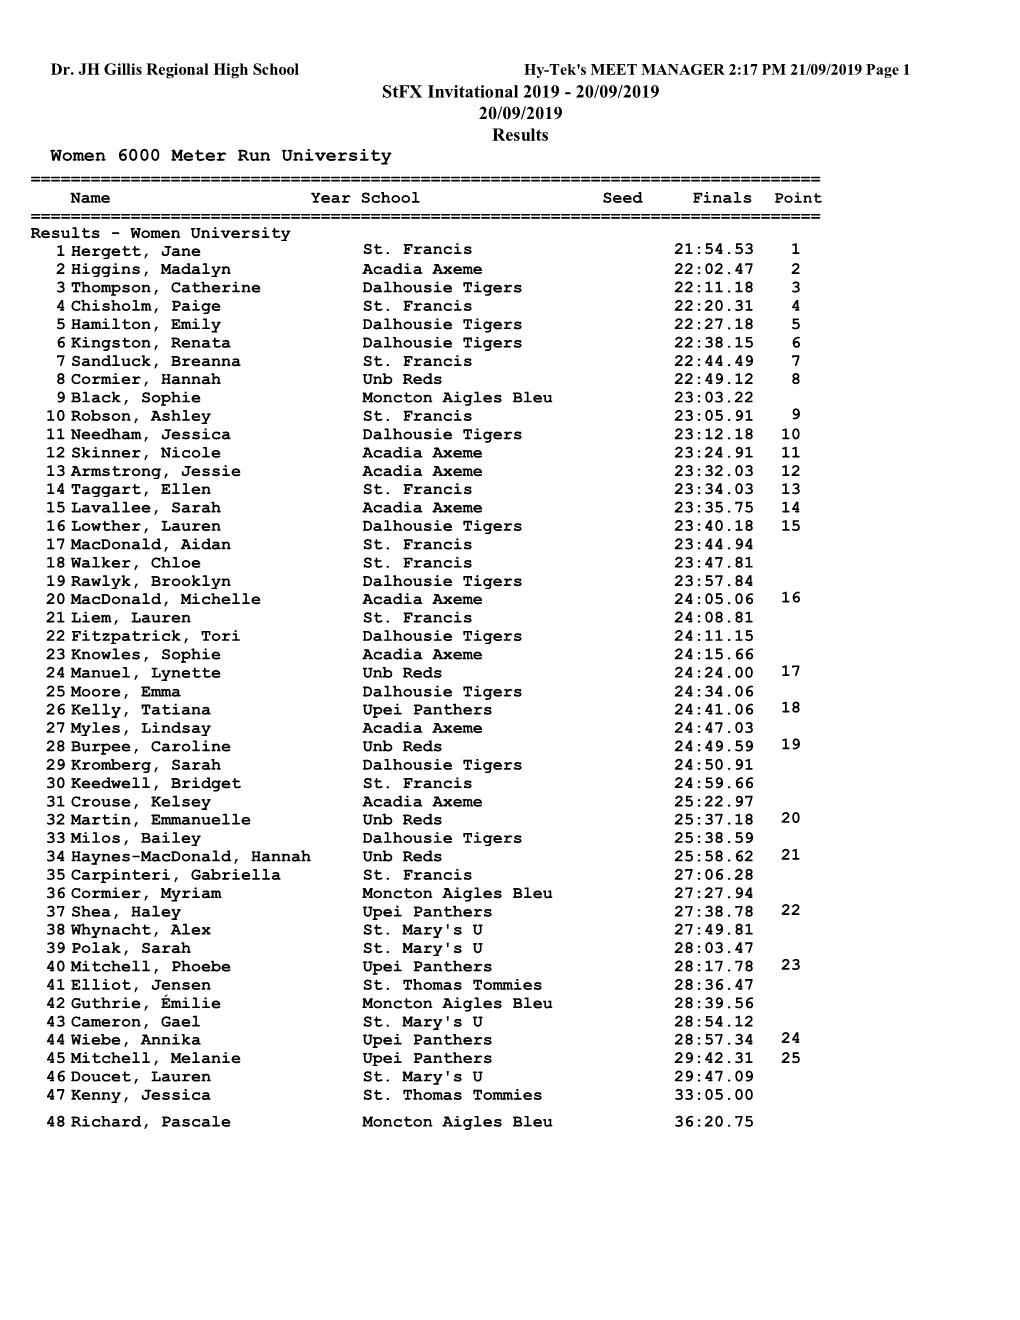 Stfx Invitational 2019 - 20/09/2019 20/09/2019 Results Women 6000 Meter Run University ======Name Year School Seed Finals Point ======